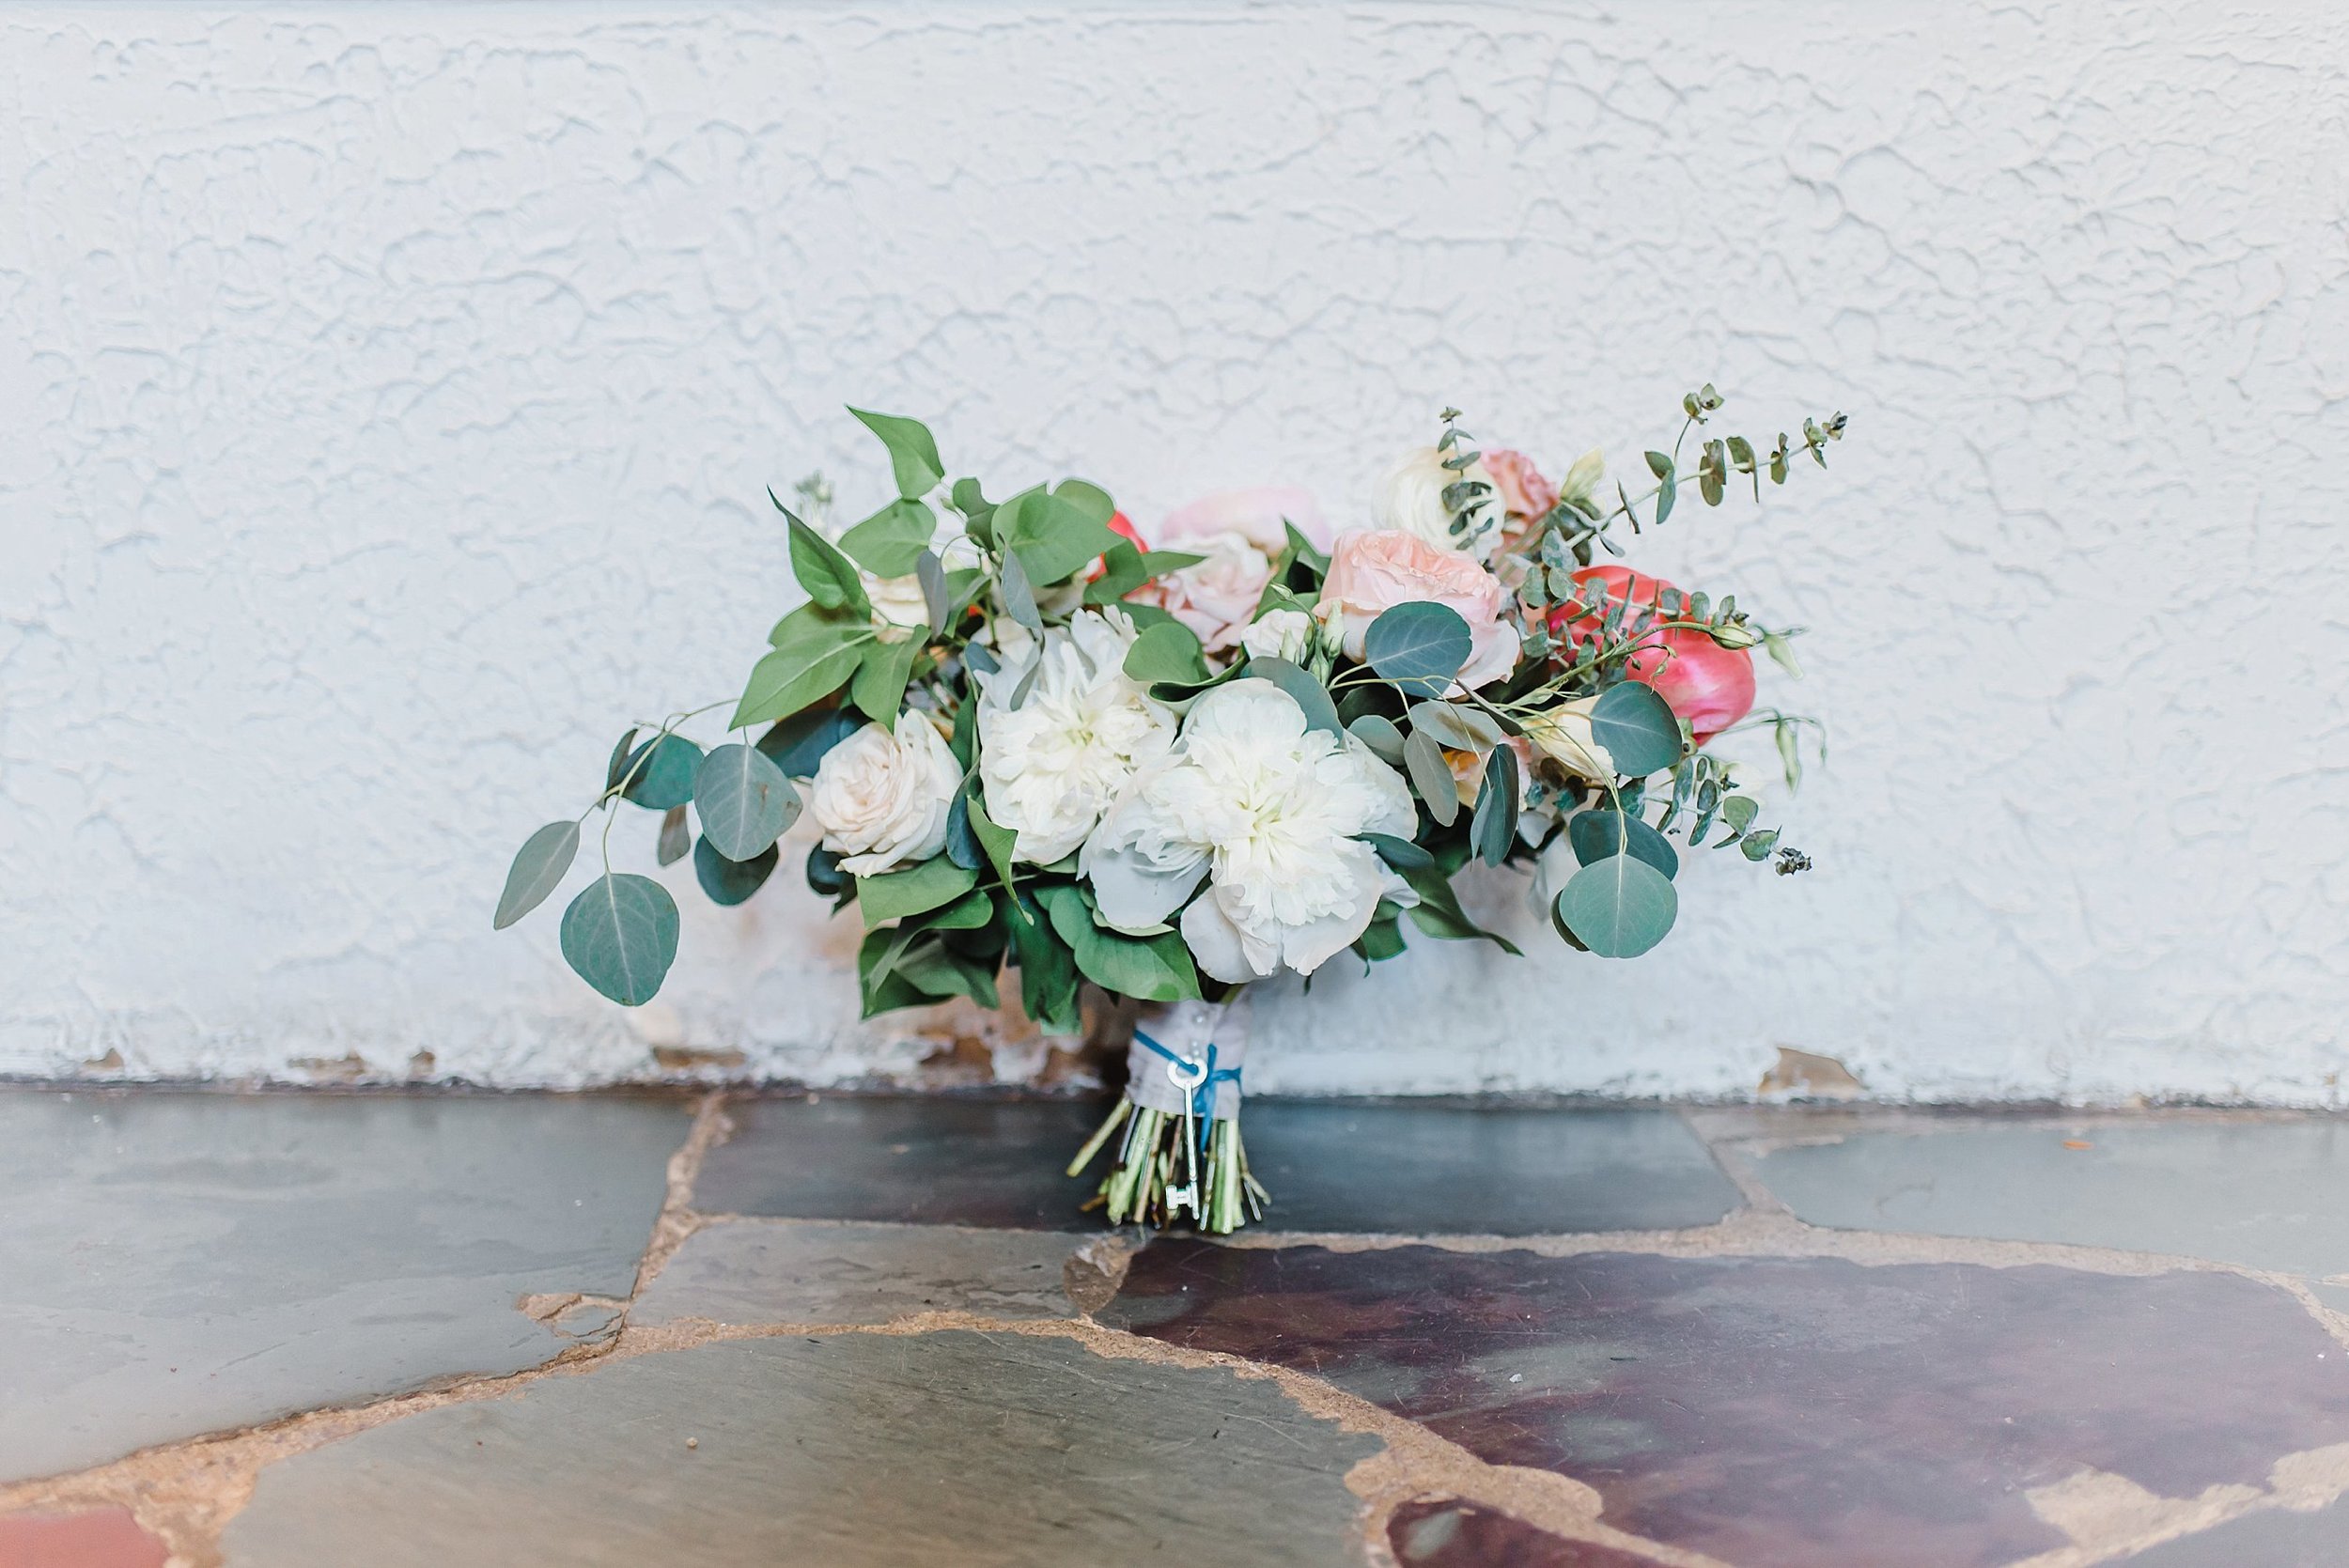  The most beautiful garden-inspired bouquet designed by Brittany Frid from Frid. 